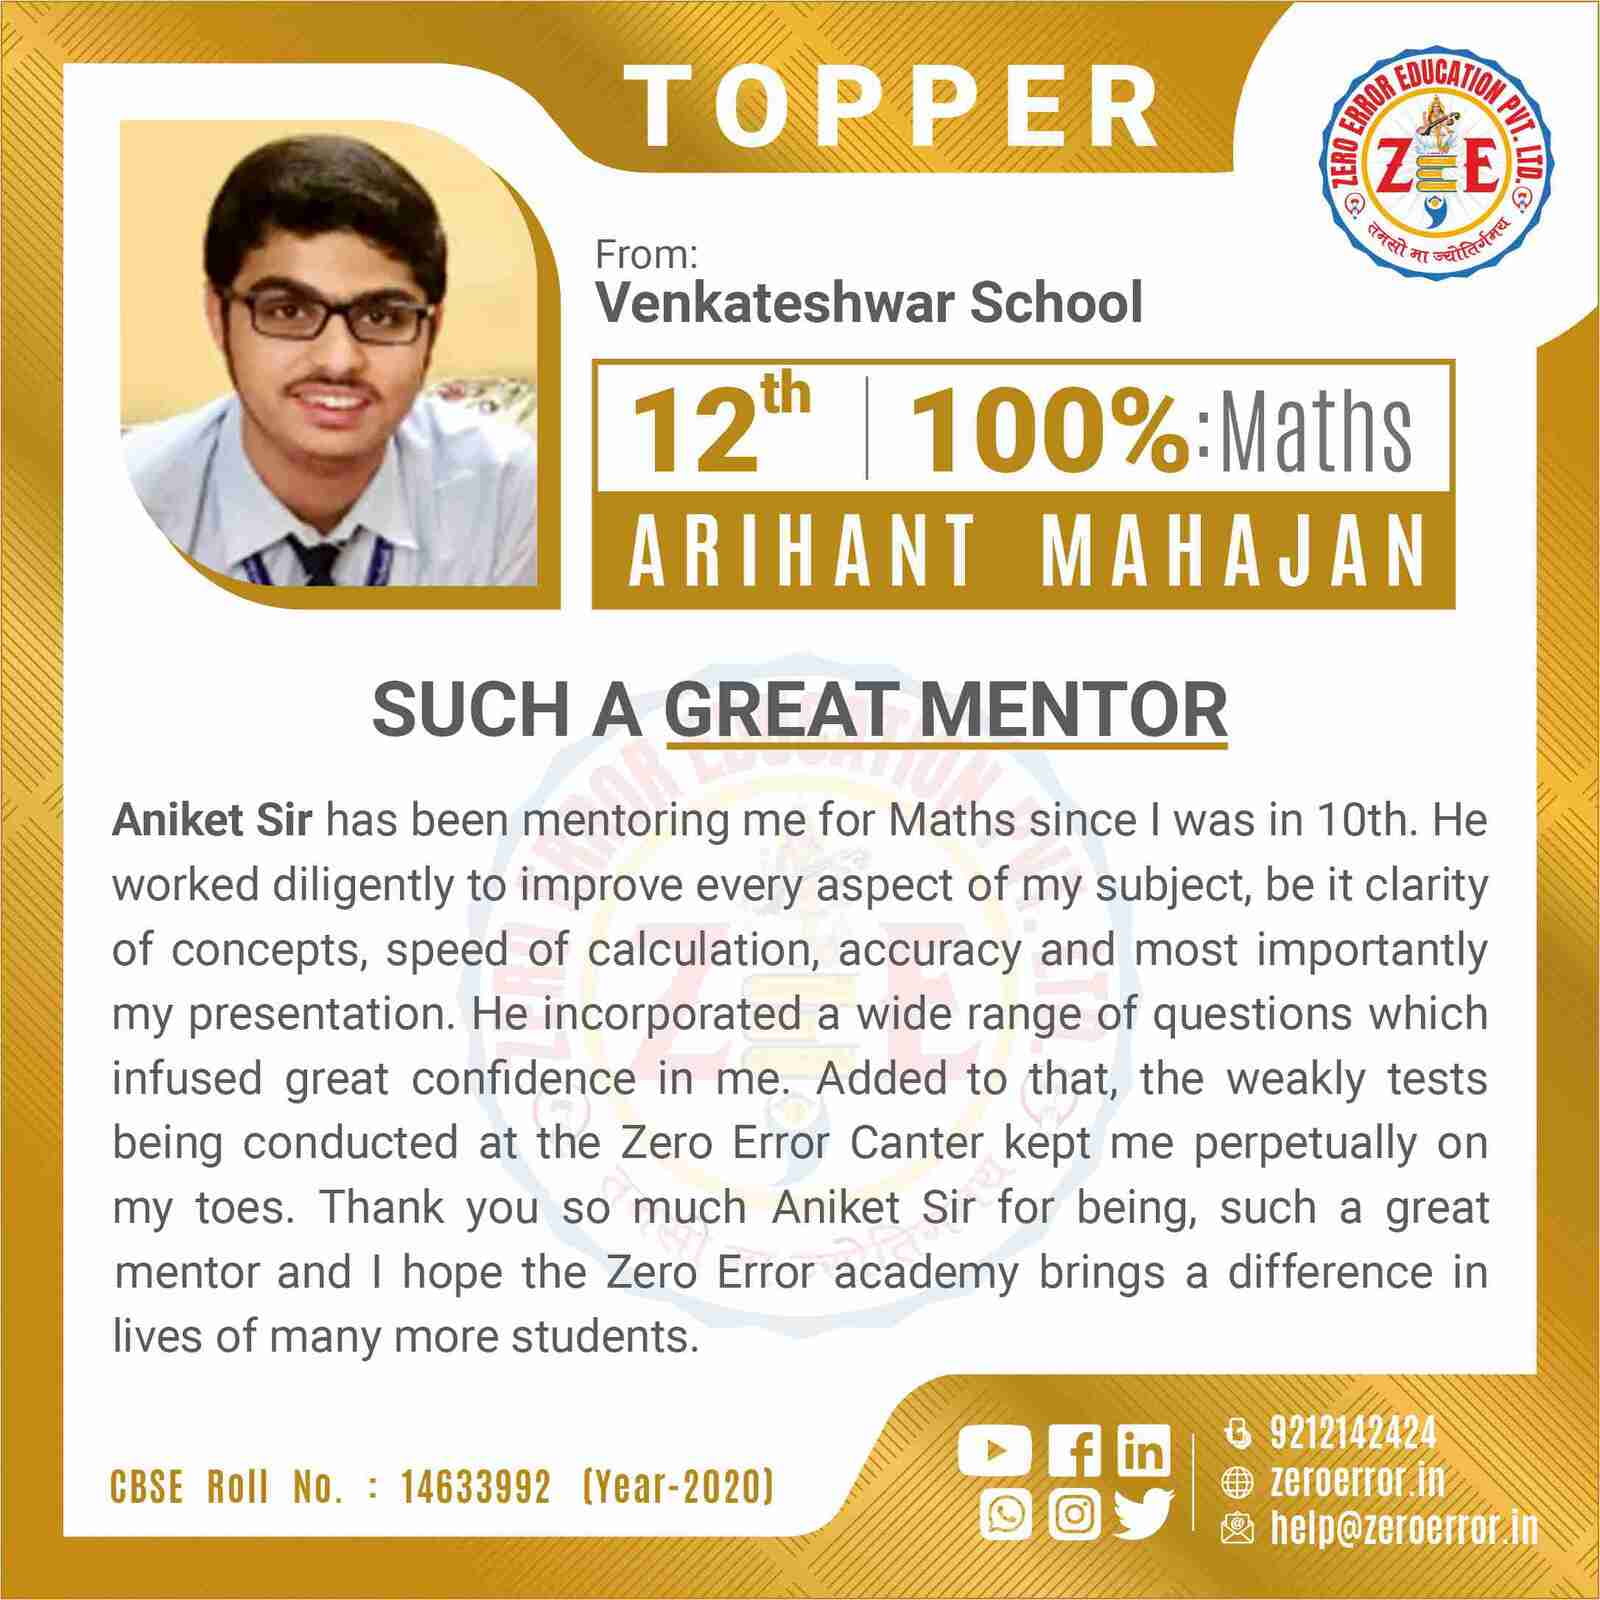 Venkateshwar, 12th School Maths Topper, with Zero Error Education. Testimonial praising Aniket Sir’s mentorship and the comprehensive Zero Error Arihant Kit for enhancing calculation speed and confidence in maths. Contact details for further inquiries